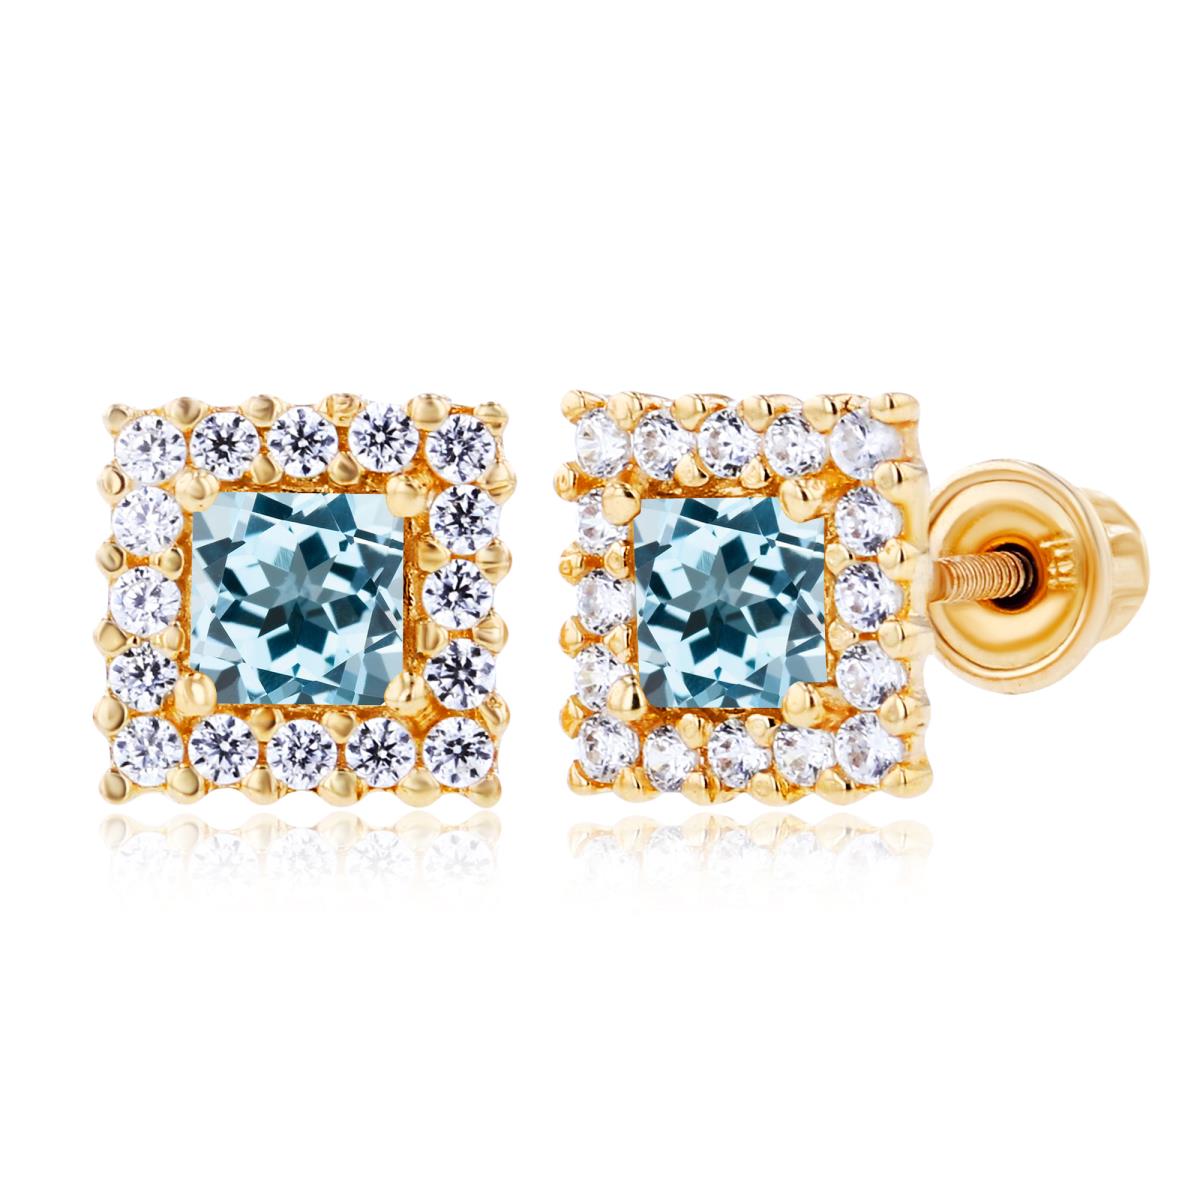 Sterling Silver Yellow 3mm Square Sky Blue Topaz & 1mm Created White Sapphire Square Screwback Earrings